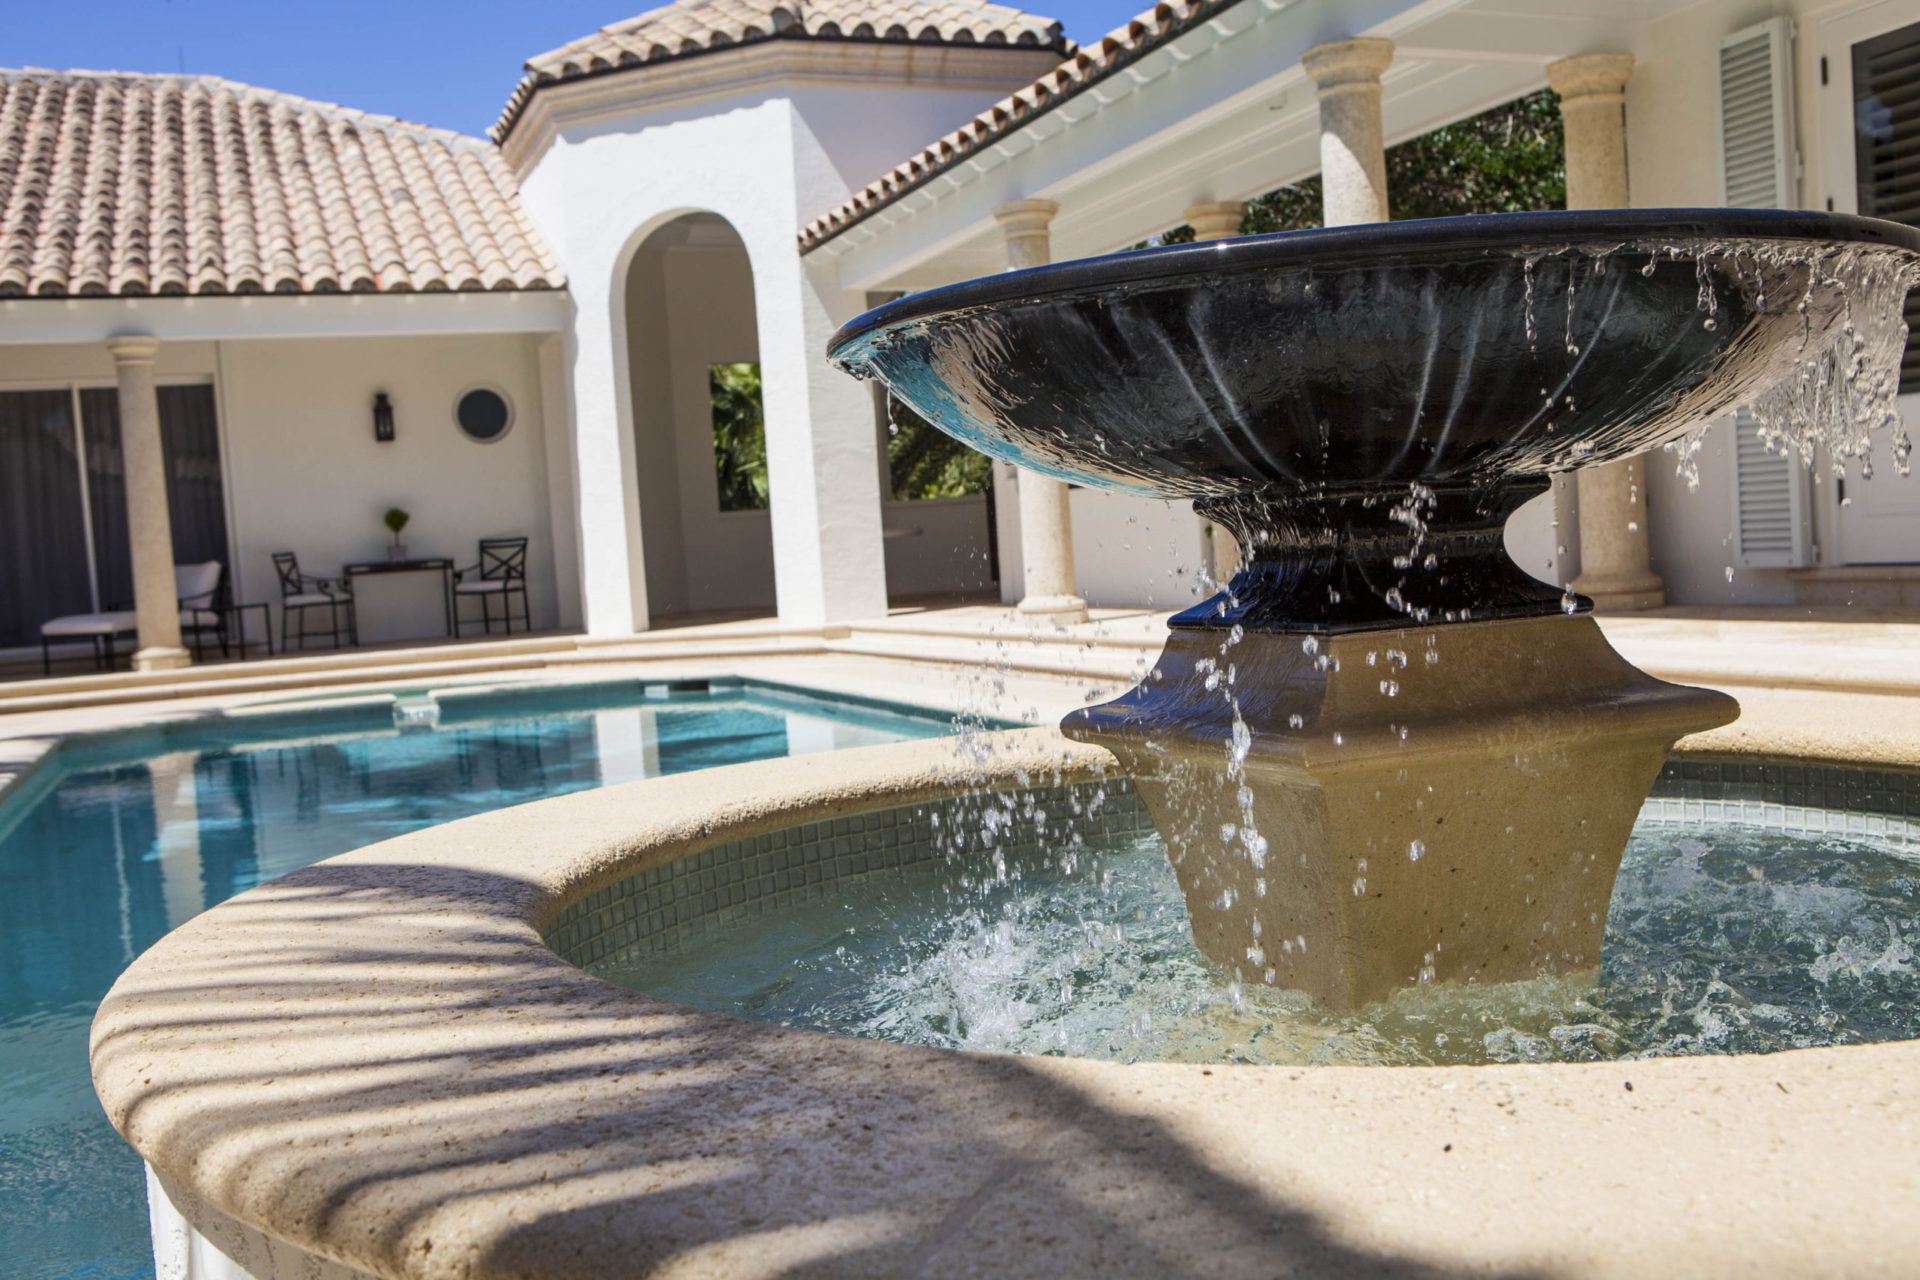 Fountains are one of the latest trends in pool remodel designs